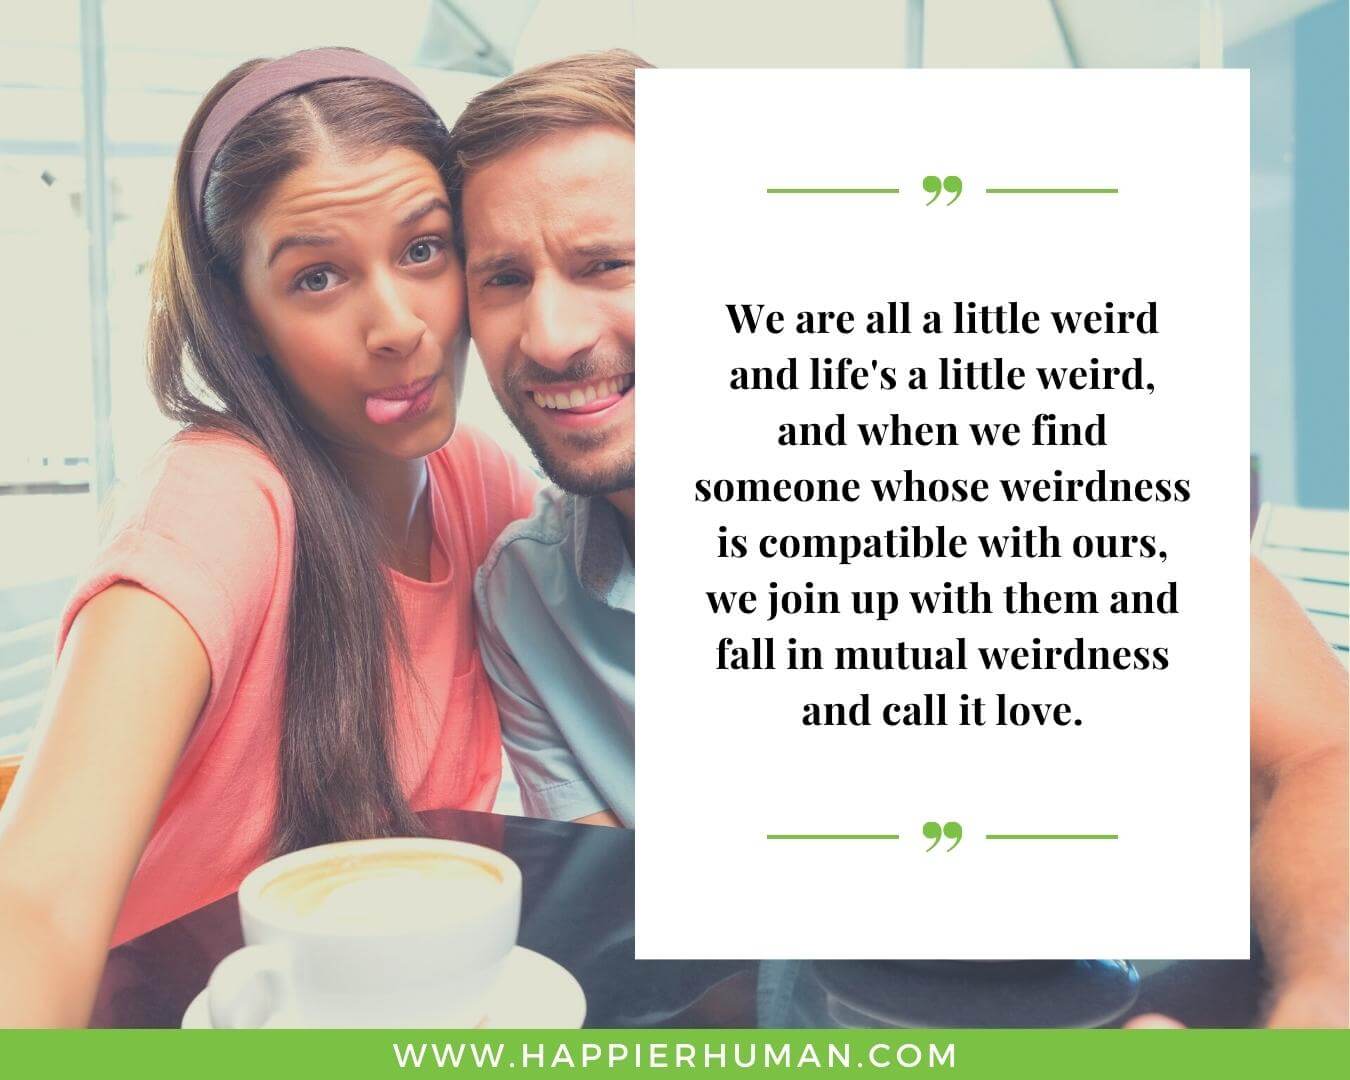 Unconditional Love Quotes for Her - “We are all a little weird and life's a little weird, and when we find someone whose weirdness is compatible with ours, we join up with them and fall in mutual weirdness and call it love.”
